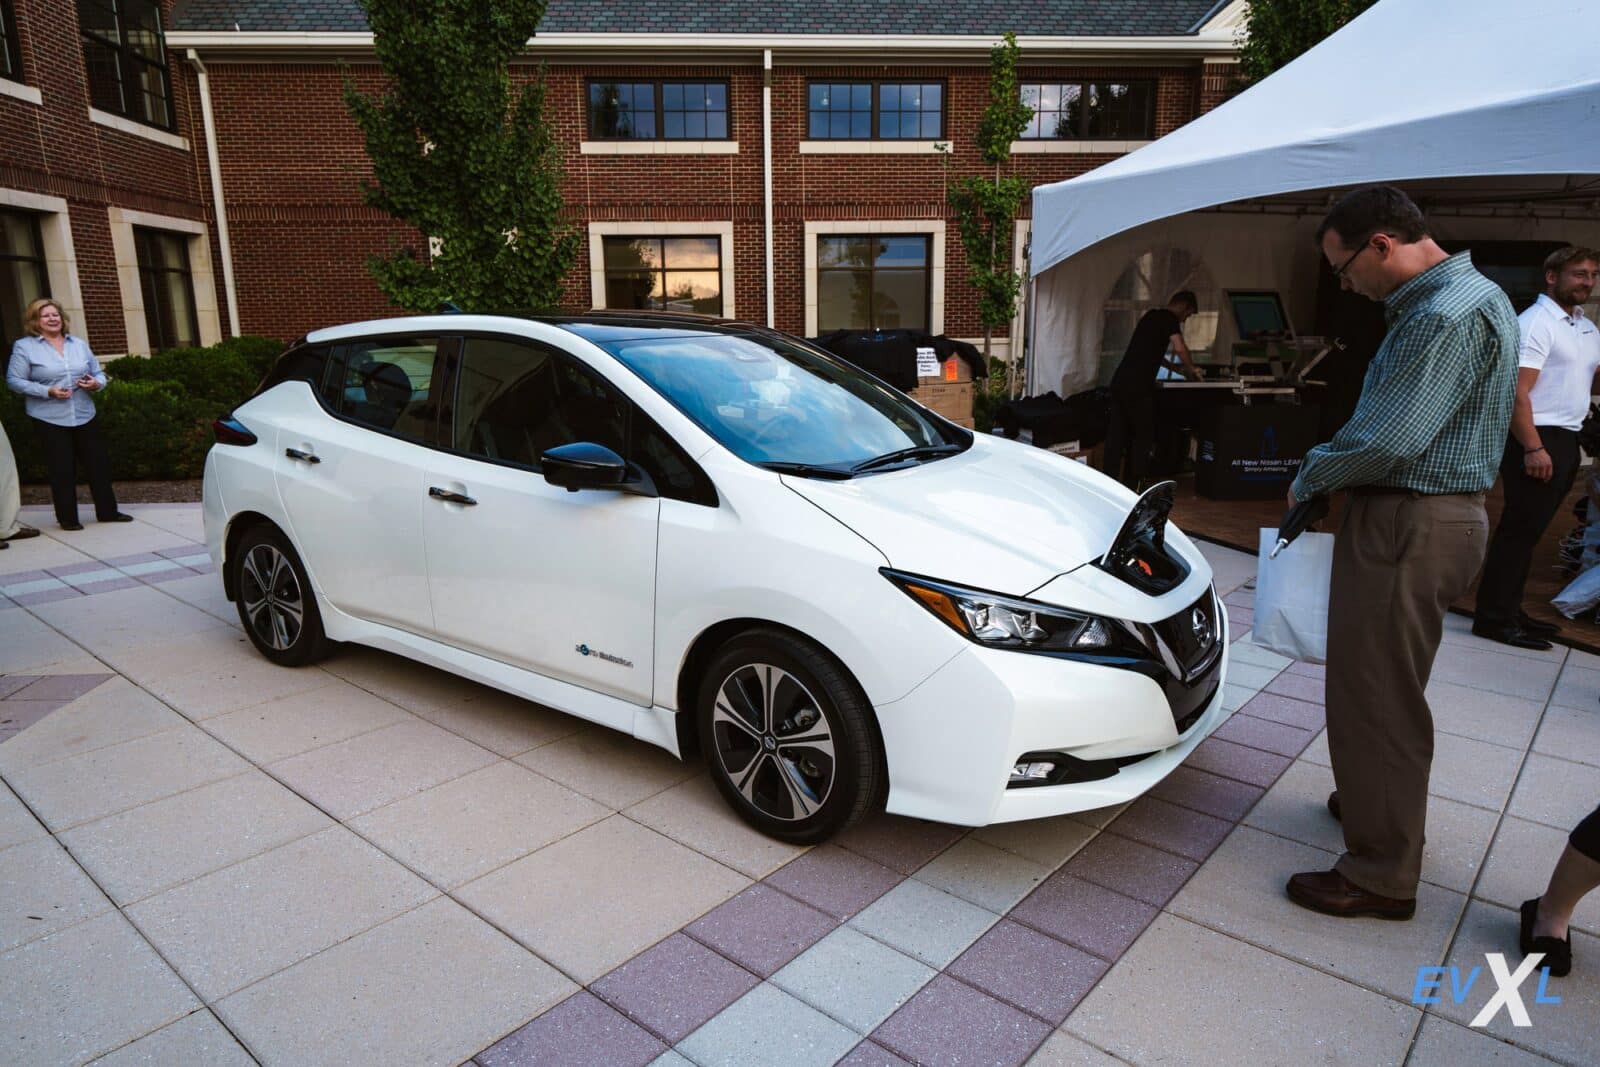 In A Move To Accelerate The Growth Of Electric Vehicles, Nissan, A Prominent Japanese Automaker, Has Decided To Embrace Tesla'S Electric-Vehicle Charging Technology In The U.s. And Canada.